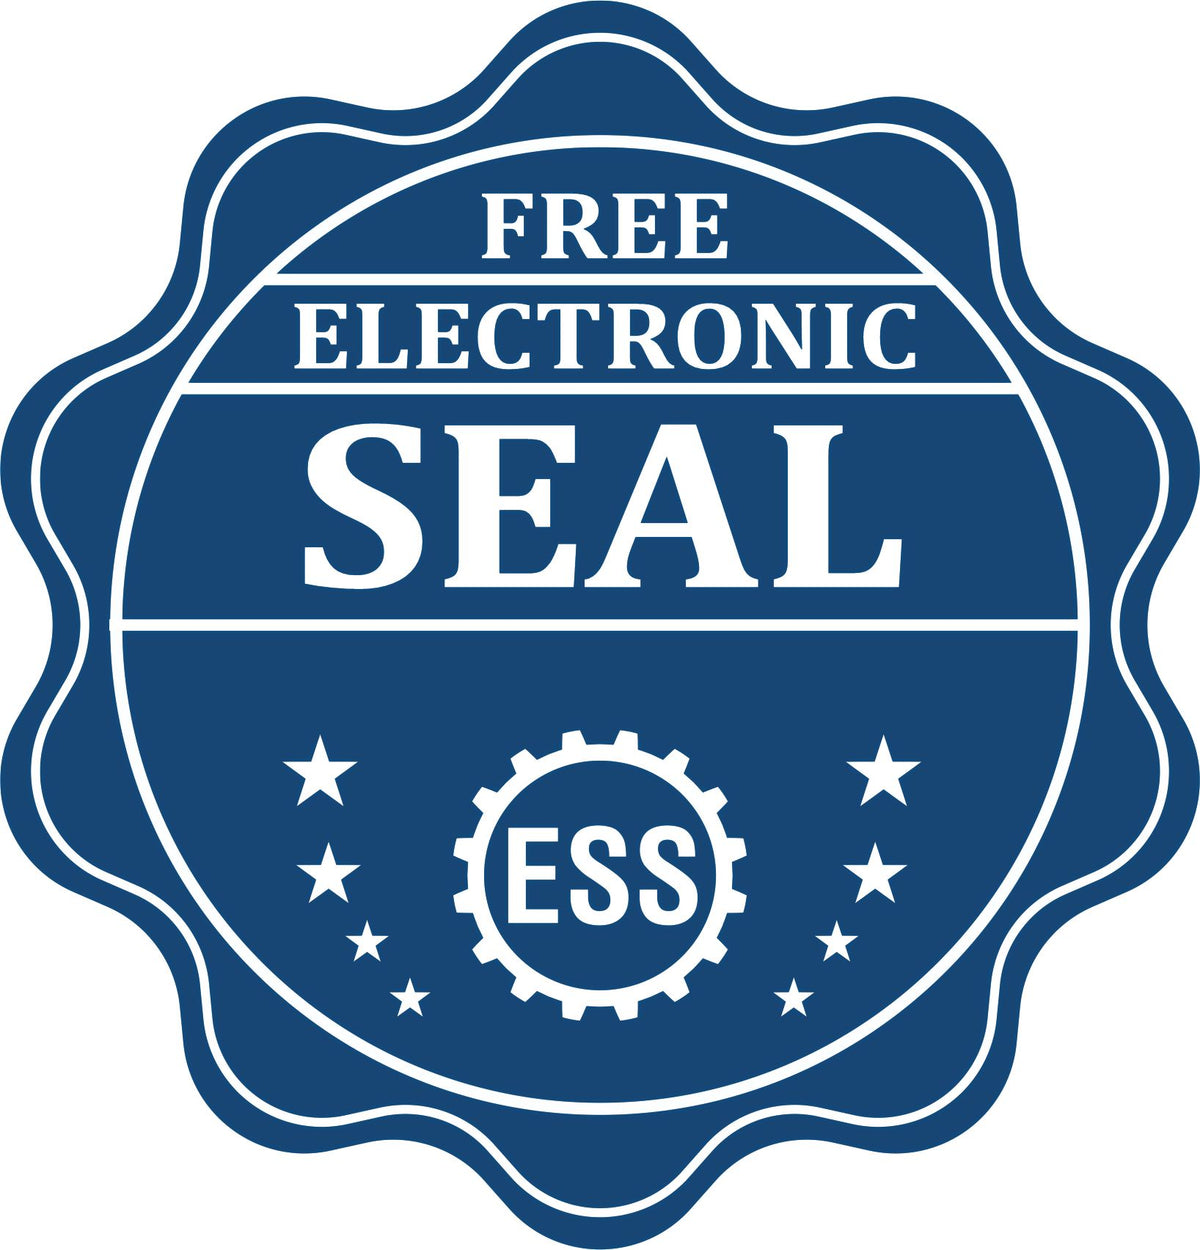 A badge showing a free electronic seal for the Heavy-Duty South Carolina Rectangular Notary Stamp with stars and the ESS gear on the emblem.